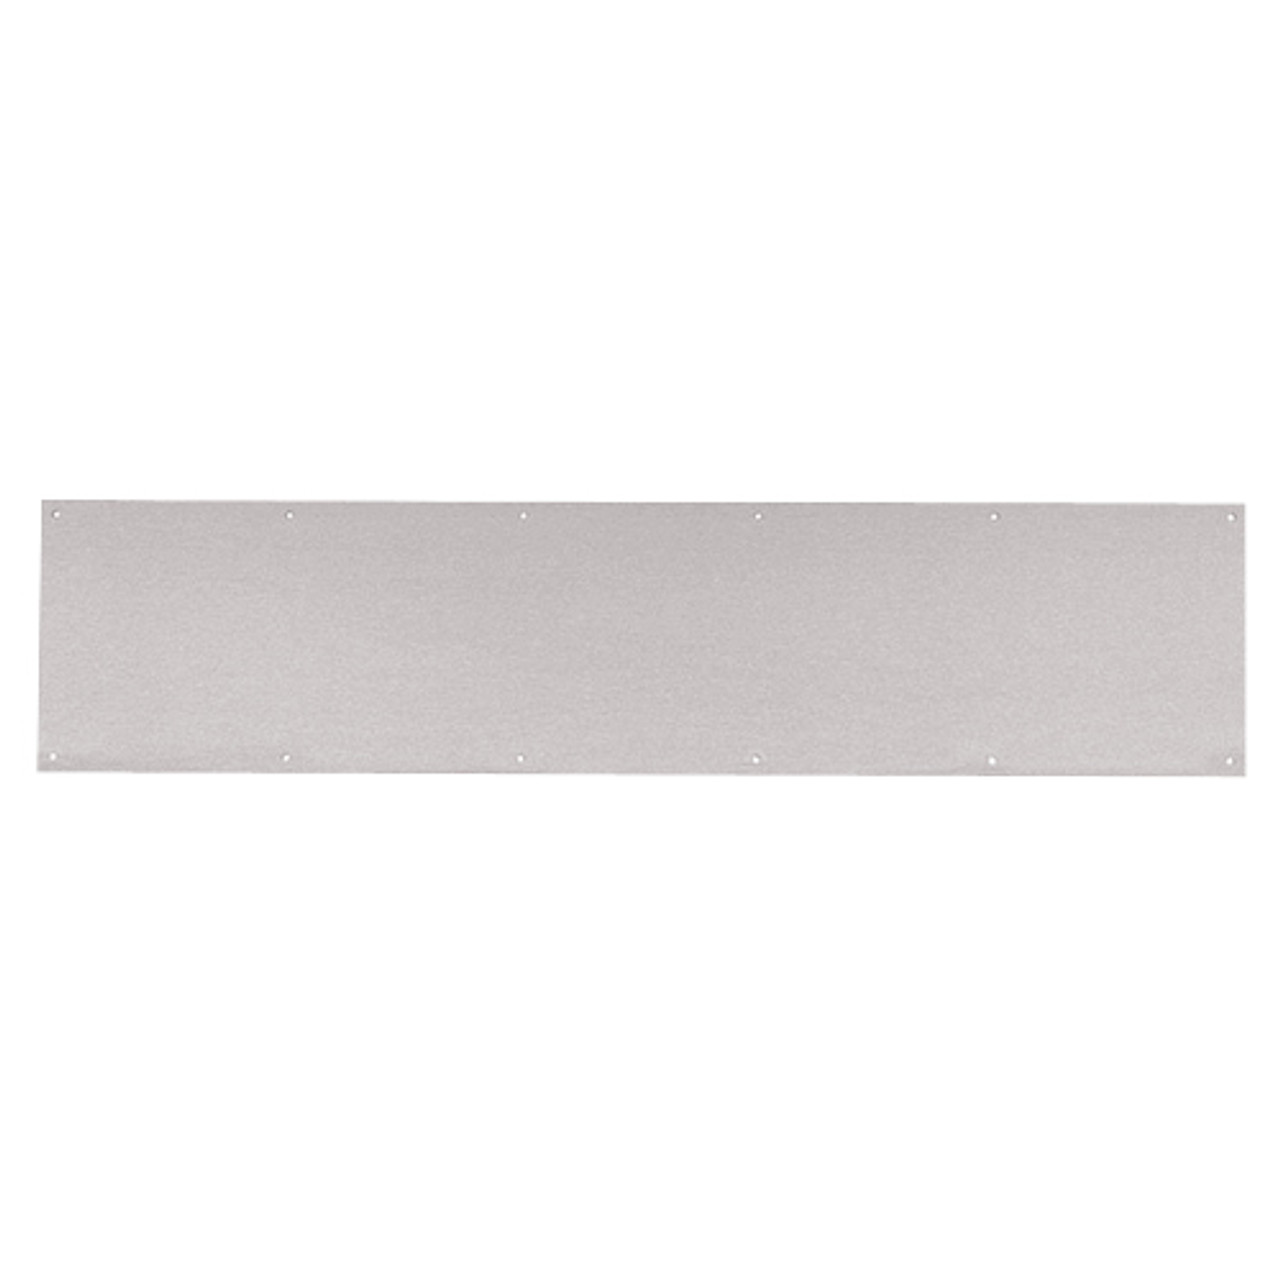 8400-US32D-36x22-B-CS Ives 8400 Series Protection Plate in Satin Stainless Steel